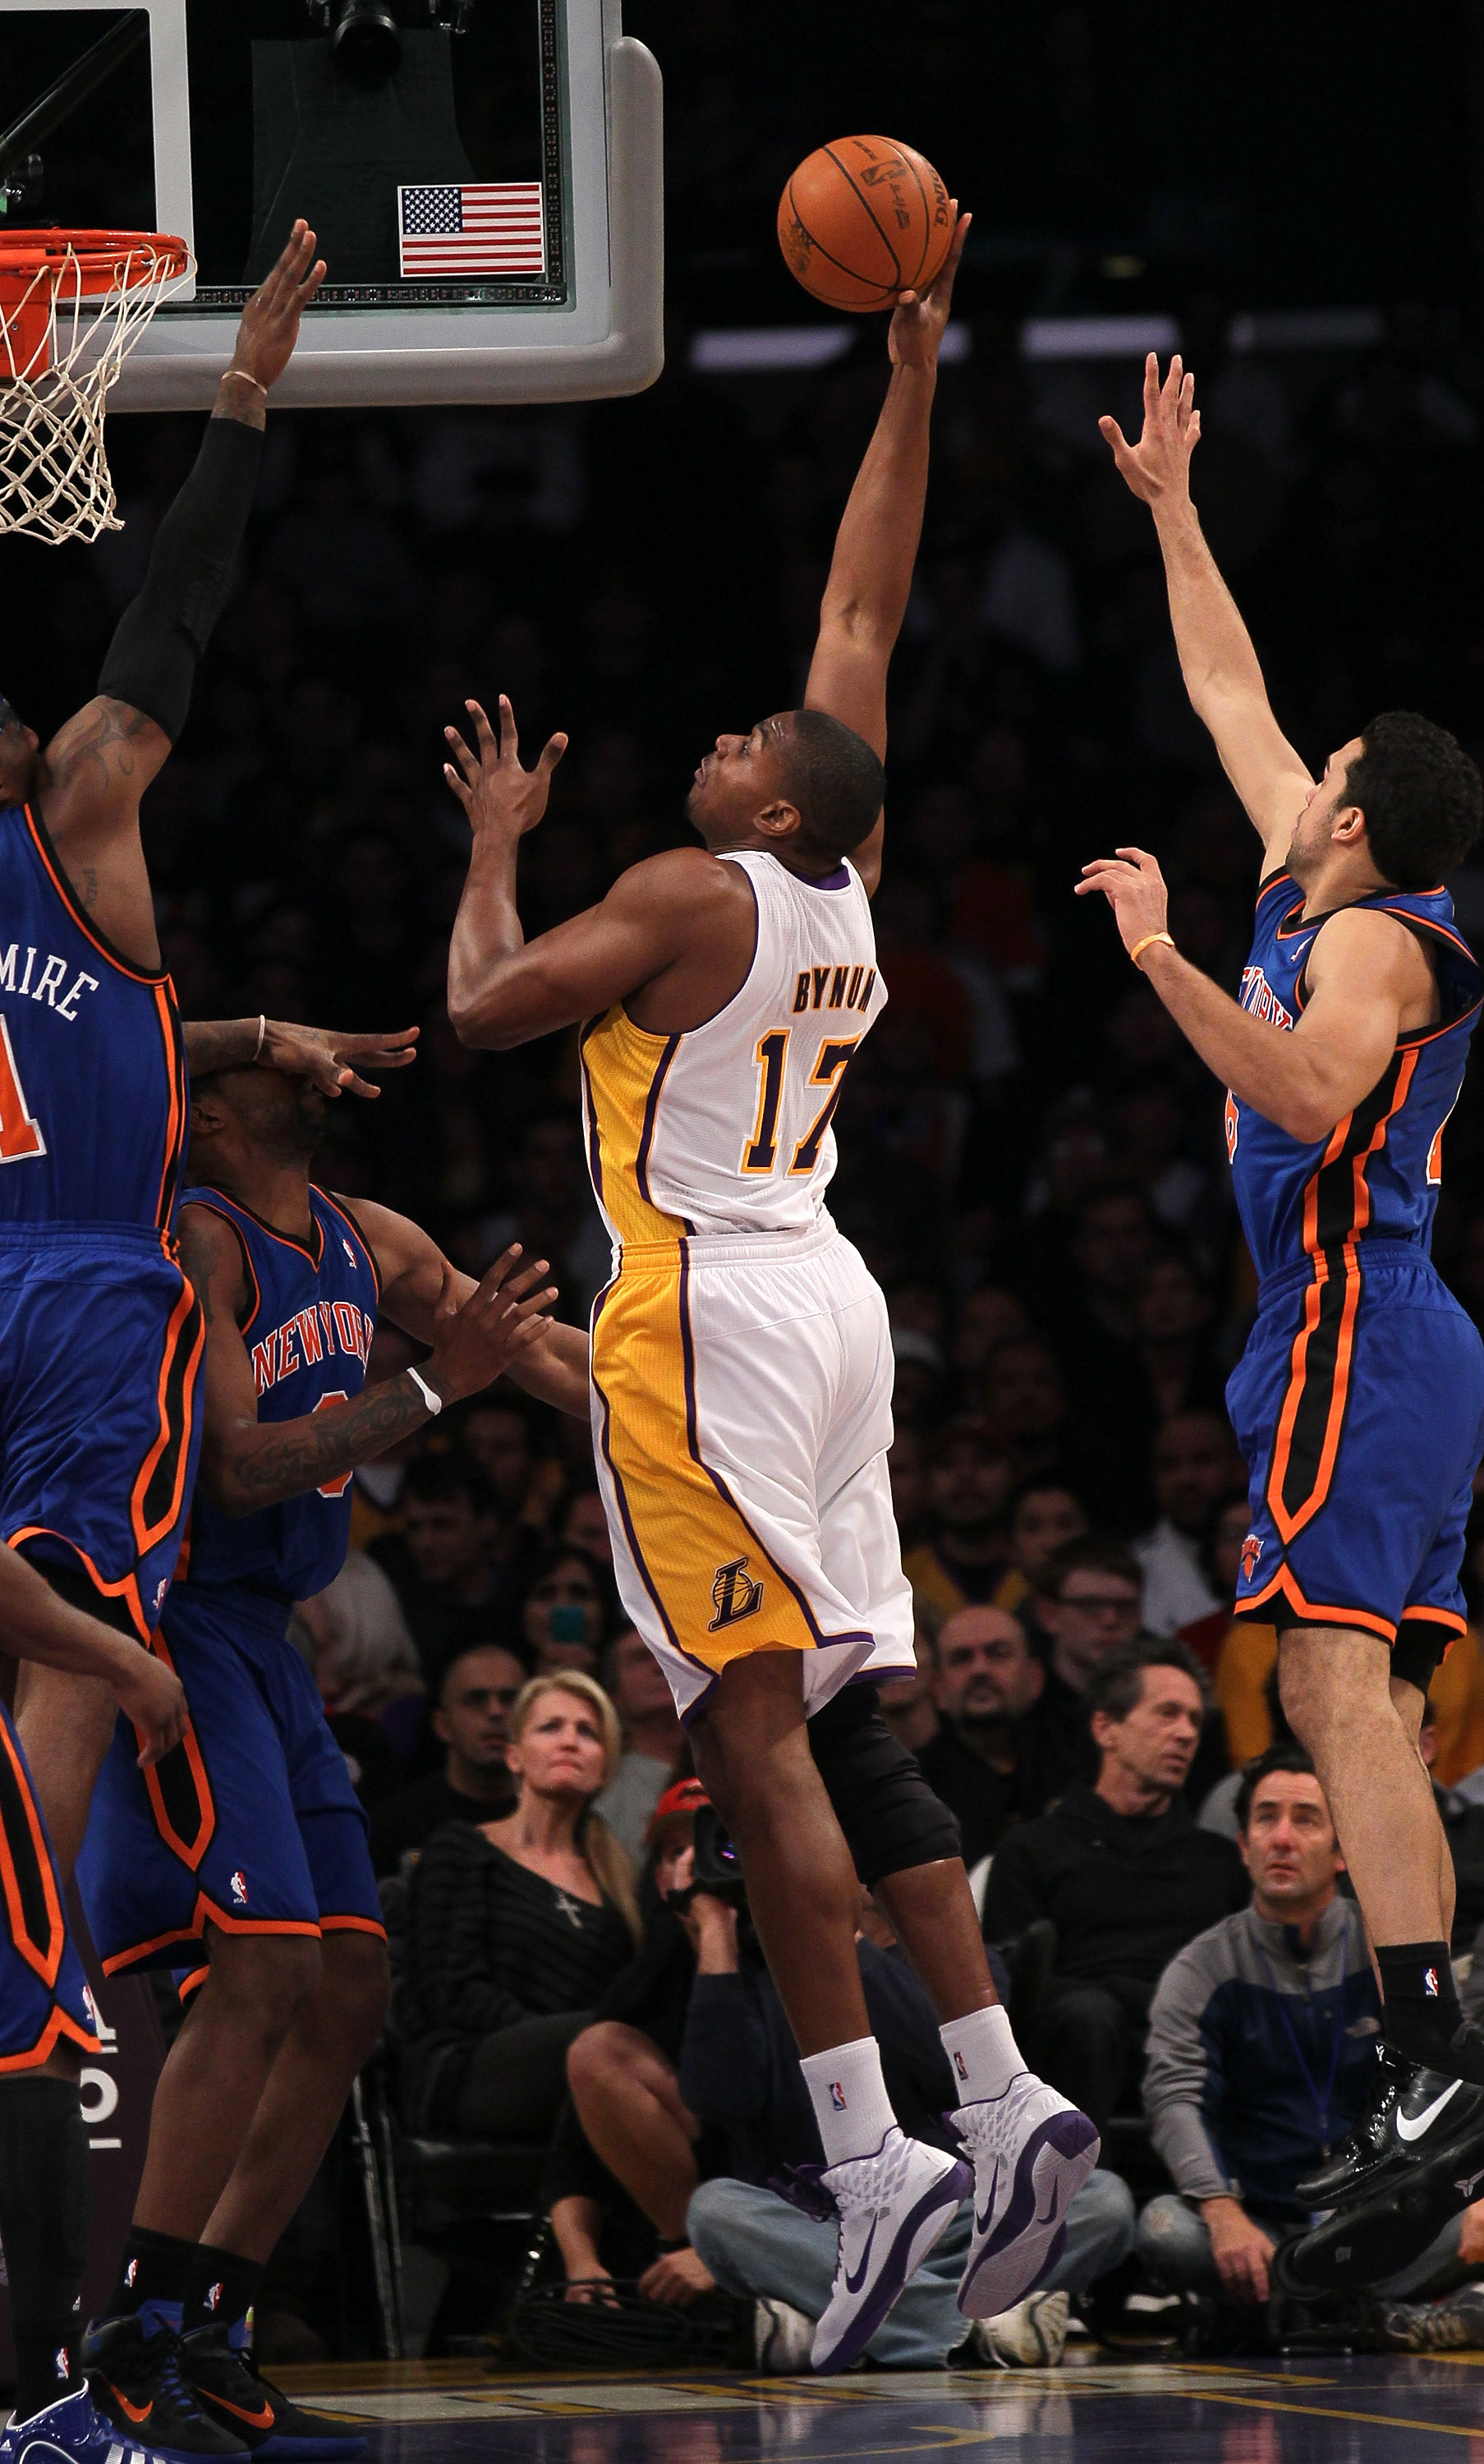 LOS ANGELES, CA - JANUARY 9: Andrew Bynum #17 of the Los Angeles Lakers shoots against the New York Knicks at Staples Center on January 9, 2011 in Los Angeles, California.  The Lakers won 109-87.   NOTE TO USER: User expressly acknowledges and agrees that